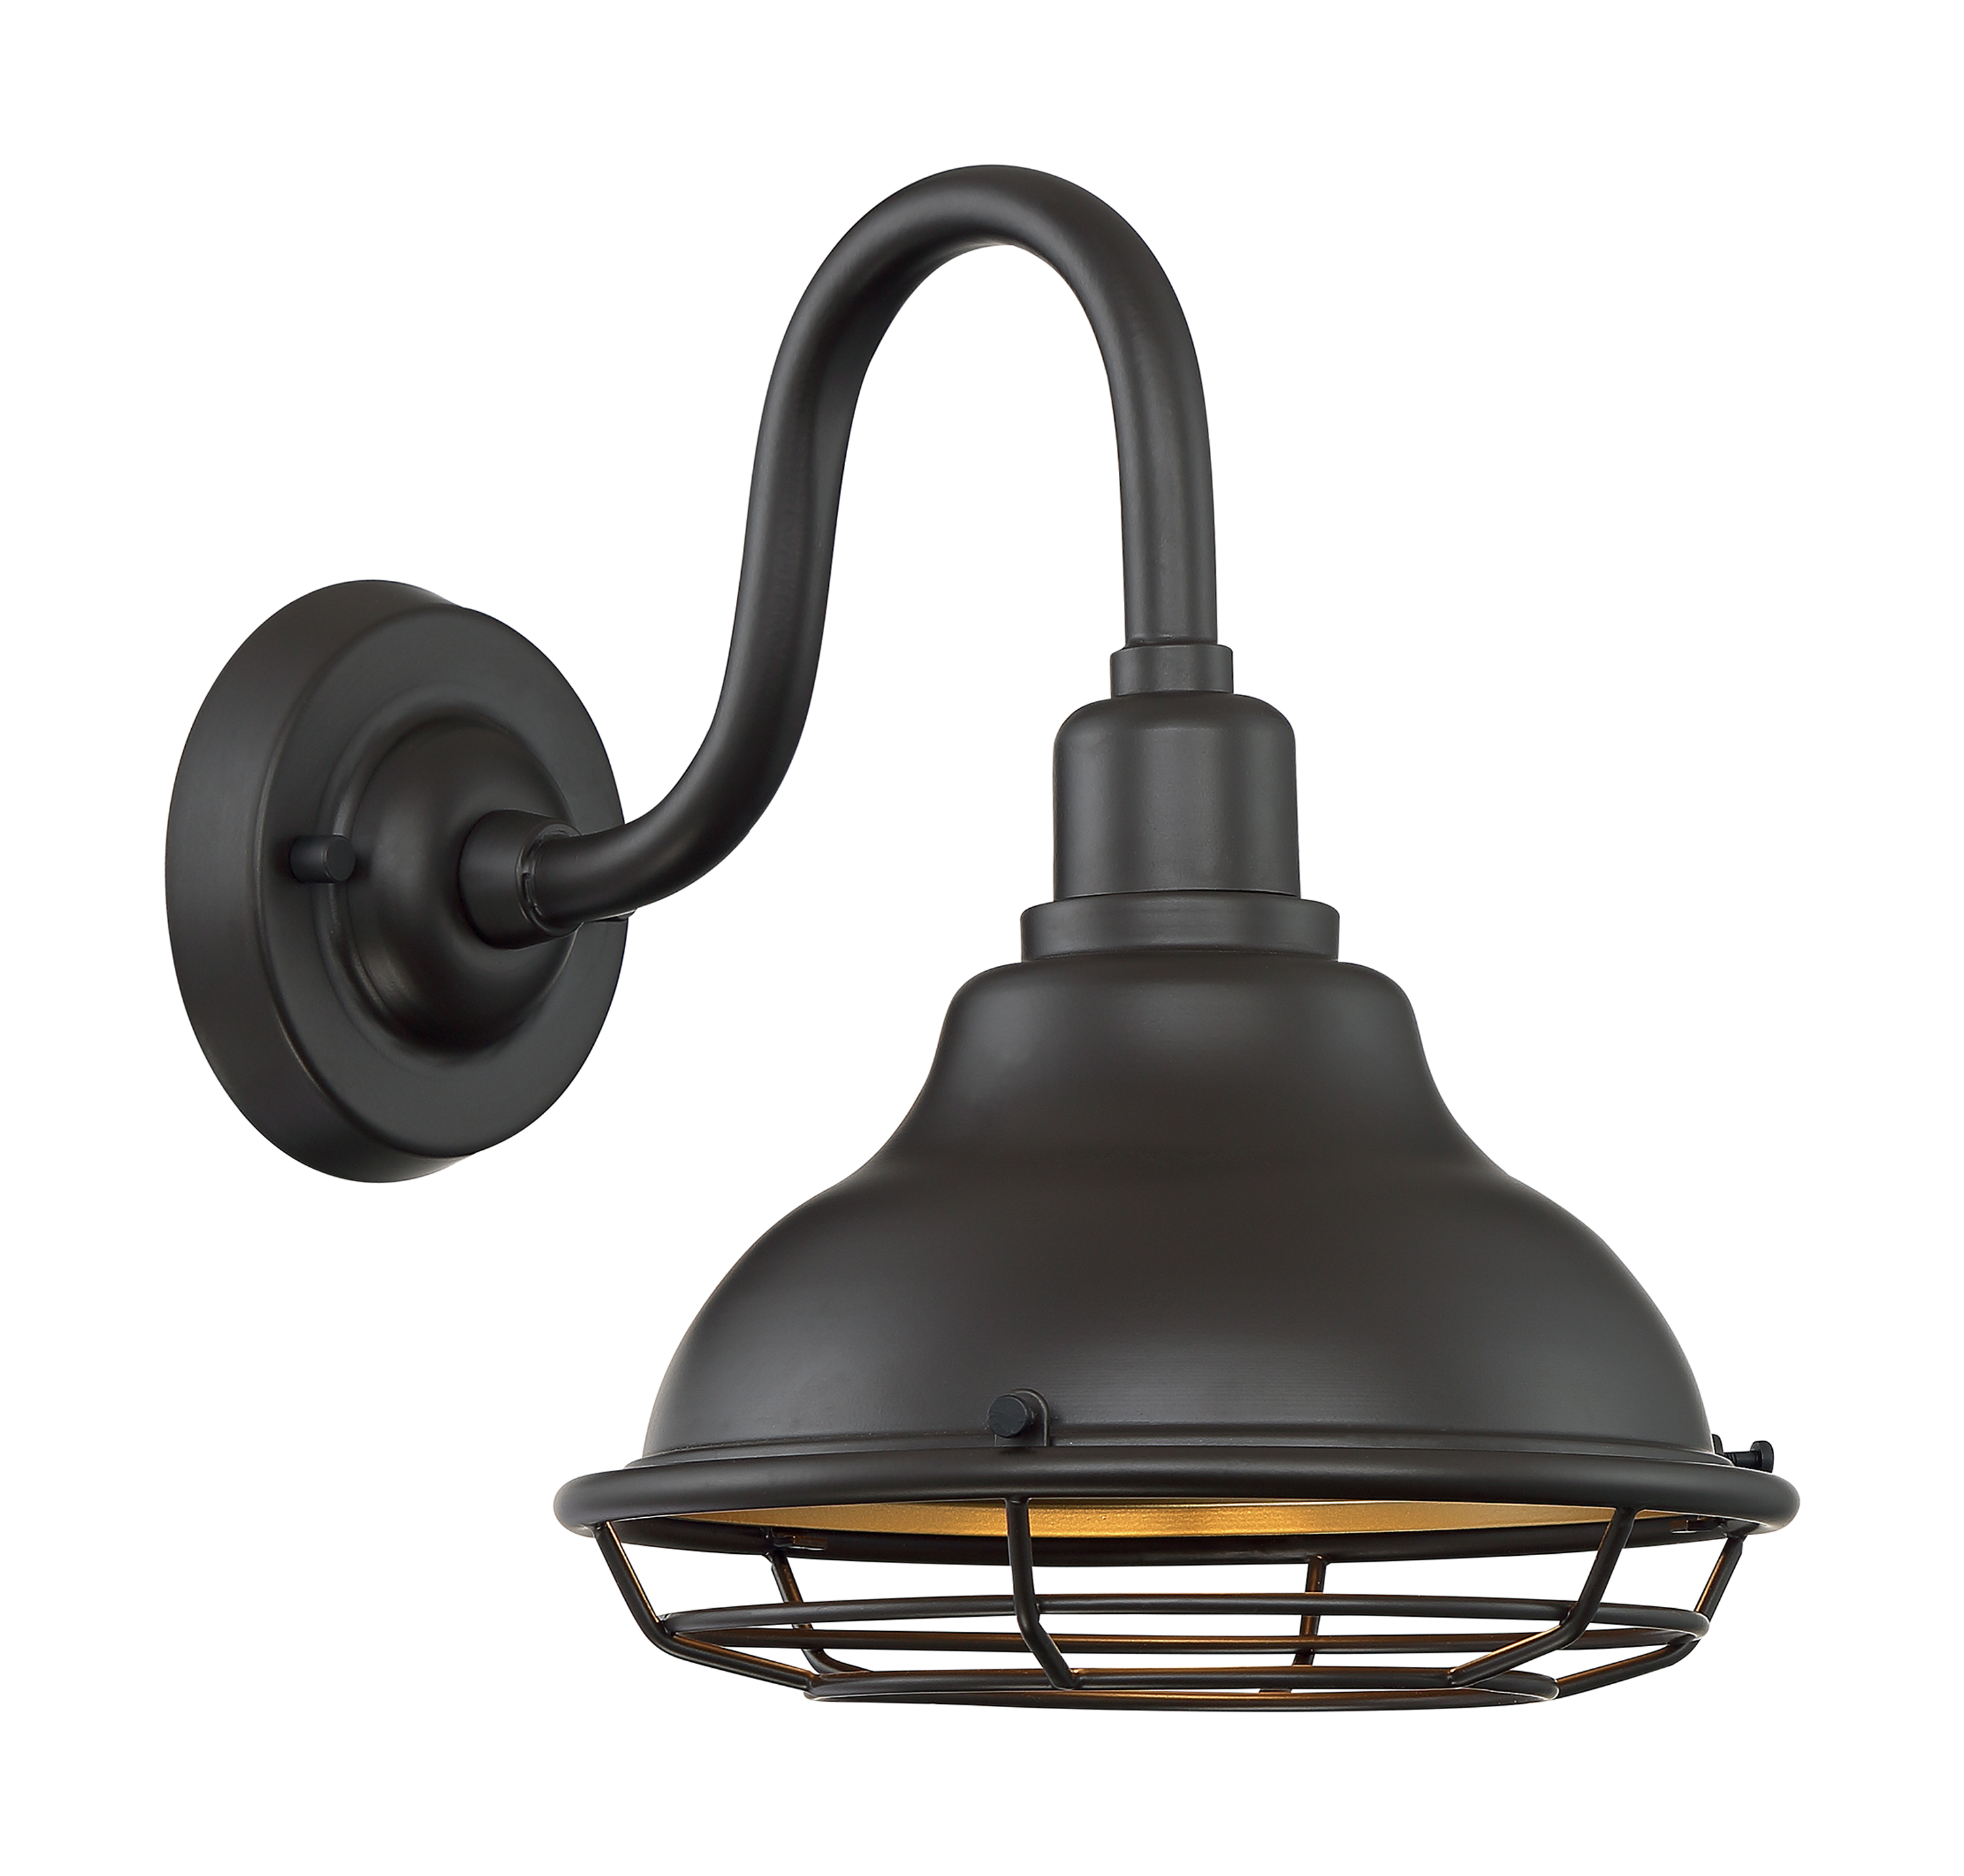 Newbridge 1-Light Small Outdoor Wall Sconce Fixture - Dark Bronze Finish with Gold Accents